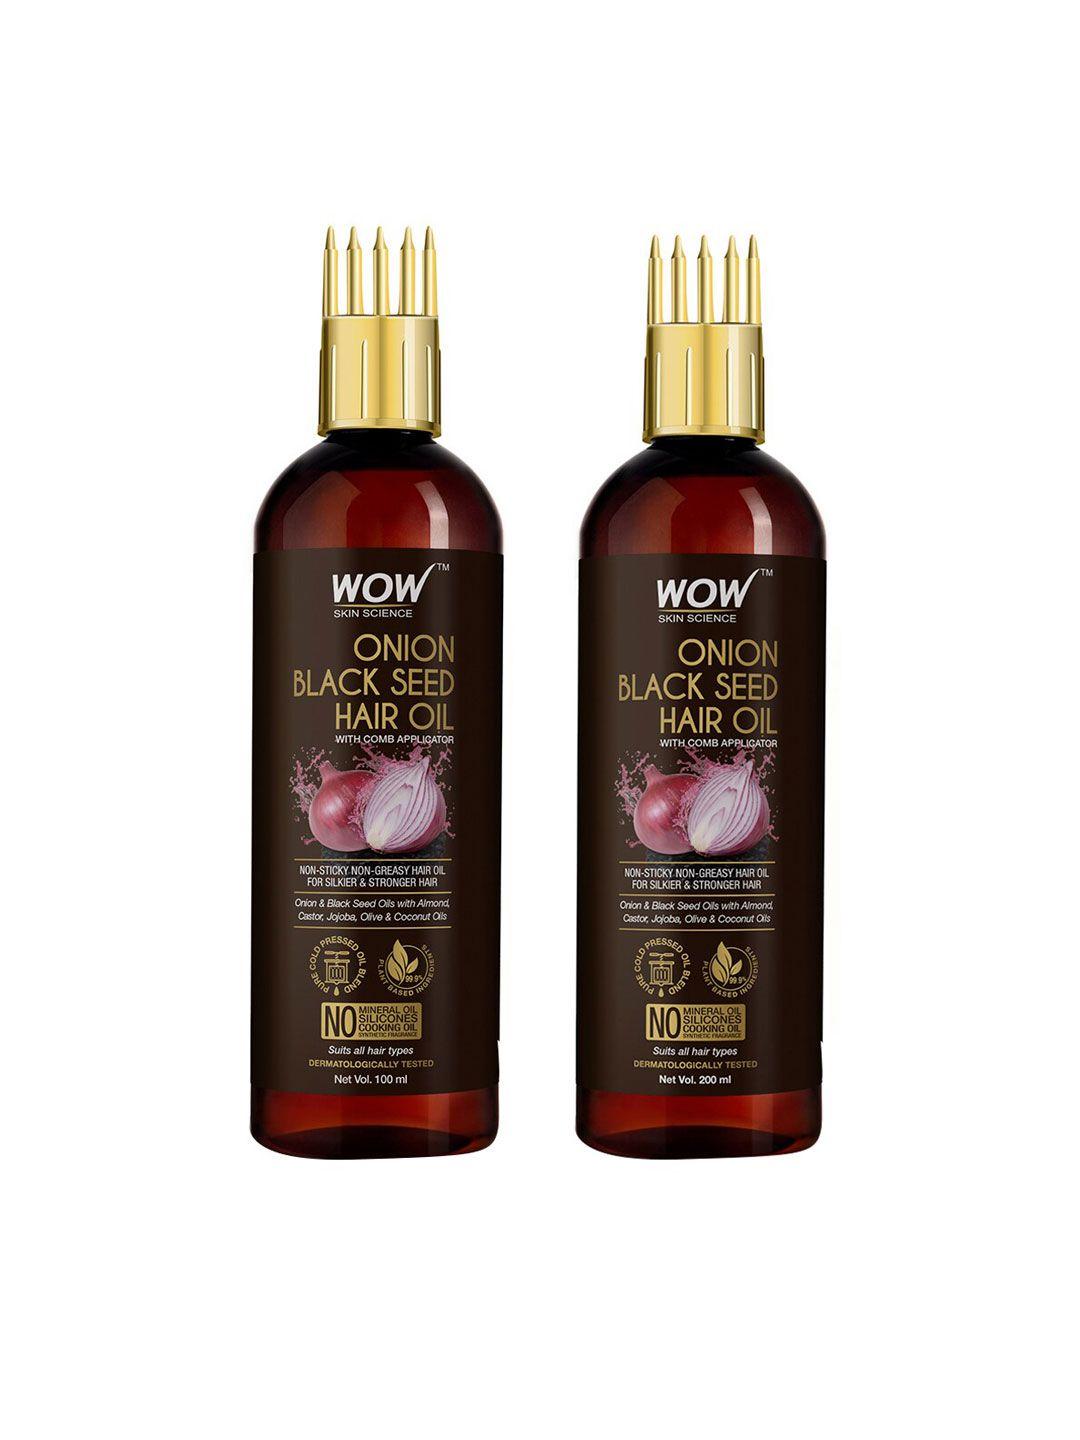 wow skin science set of 2 onion black seed hair oil - with comb applicator